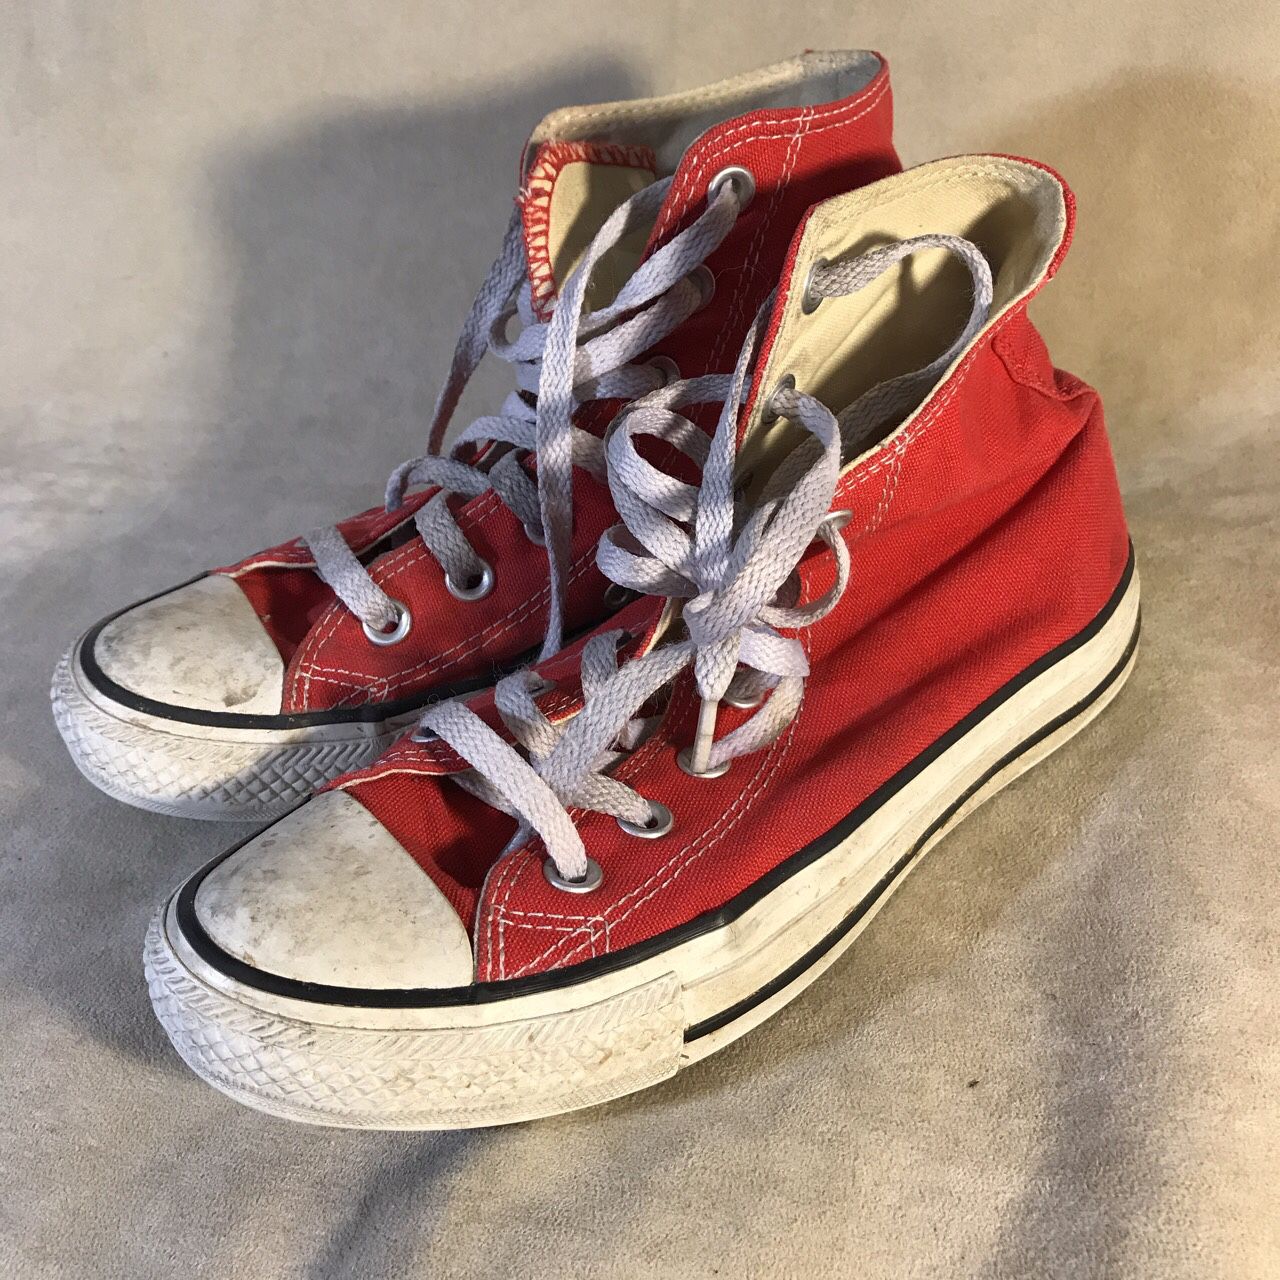 Red Converse All Star Chuck Taylor Sneakers Men’s Size 4